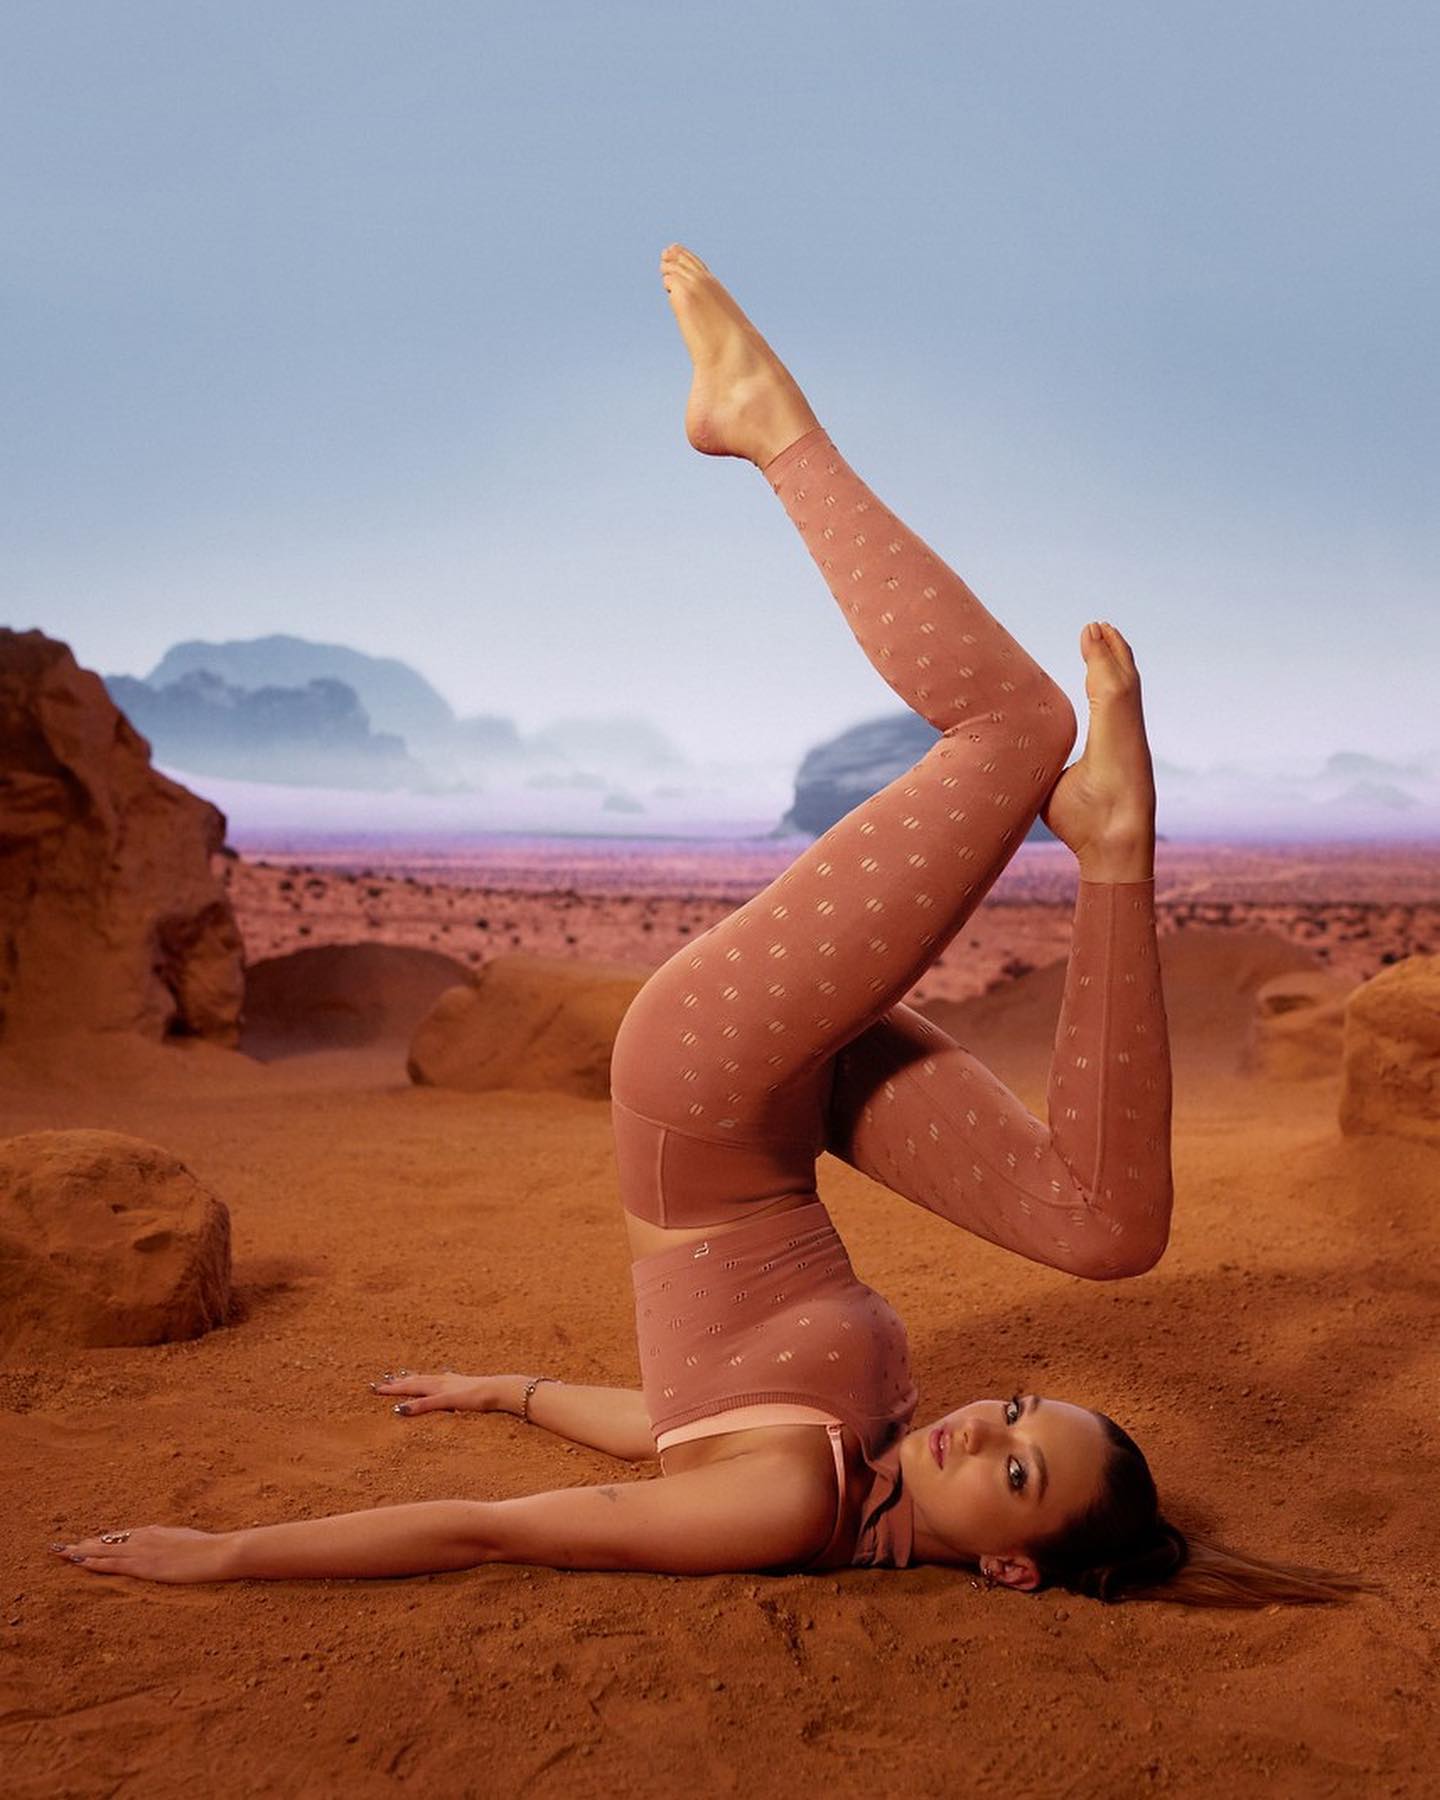 Maddie Ziegler Goes to The Desert With New Fabletics Line! - Photo 2